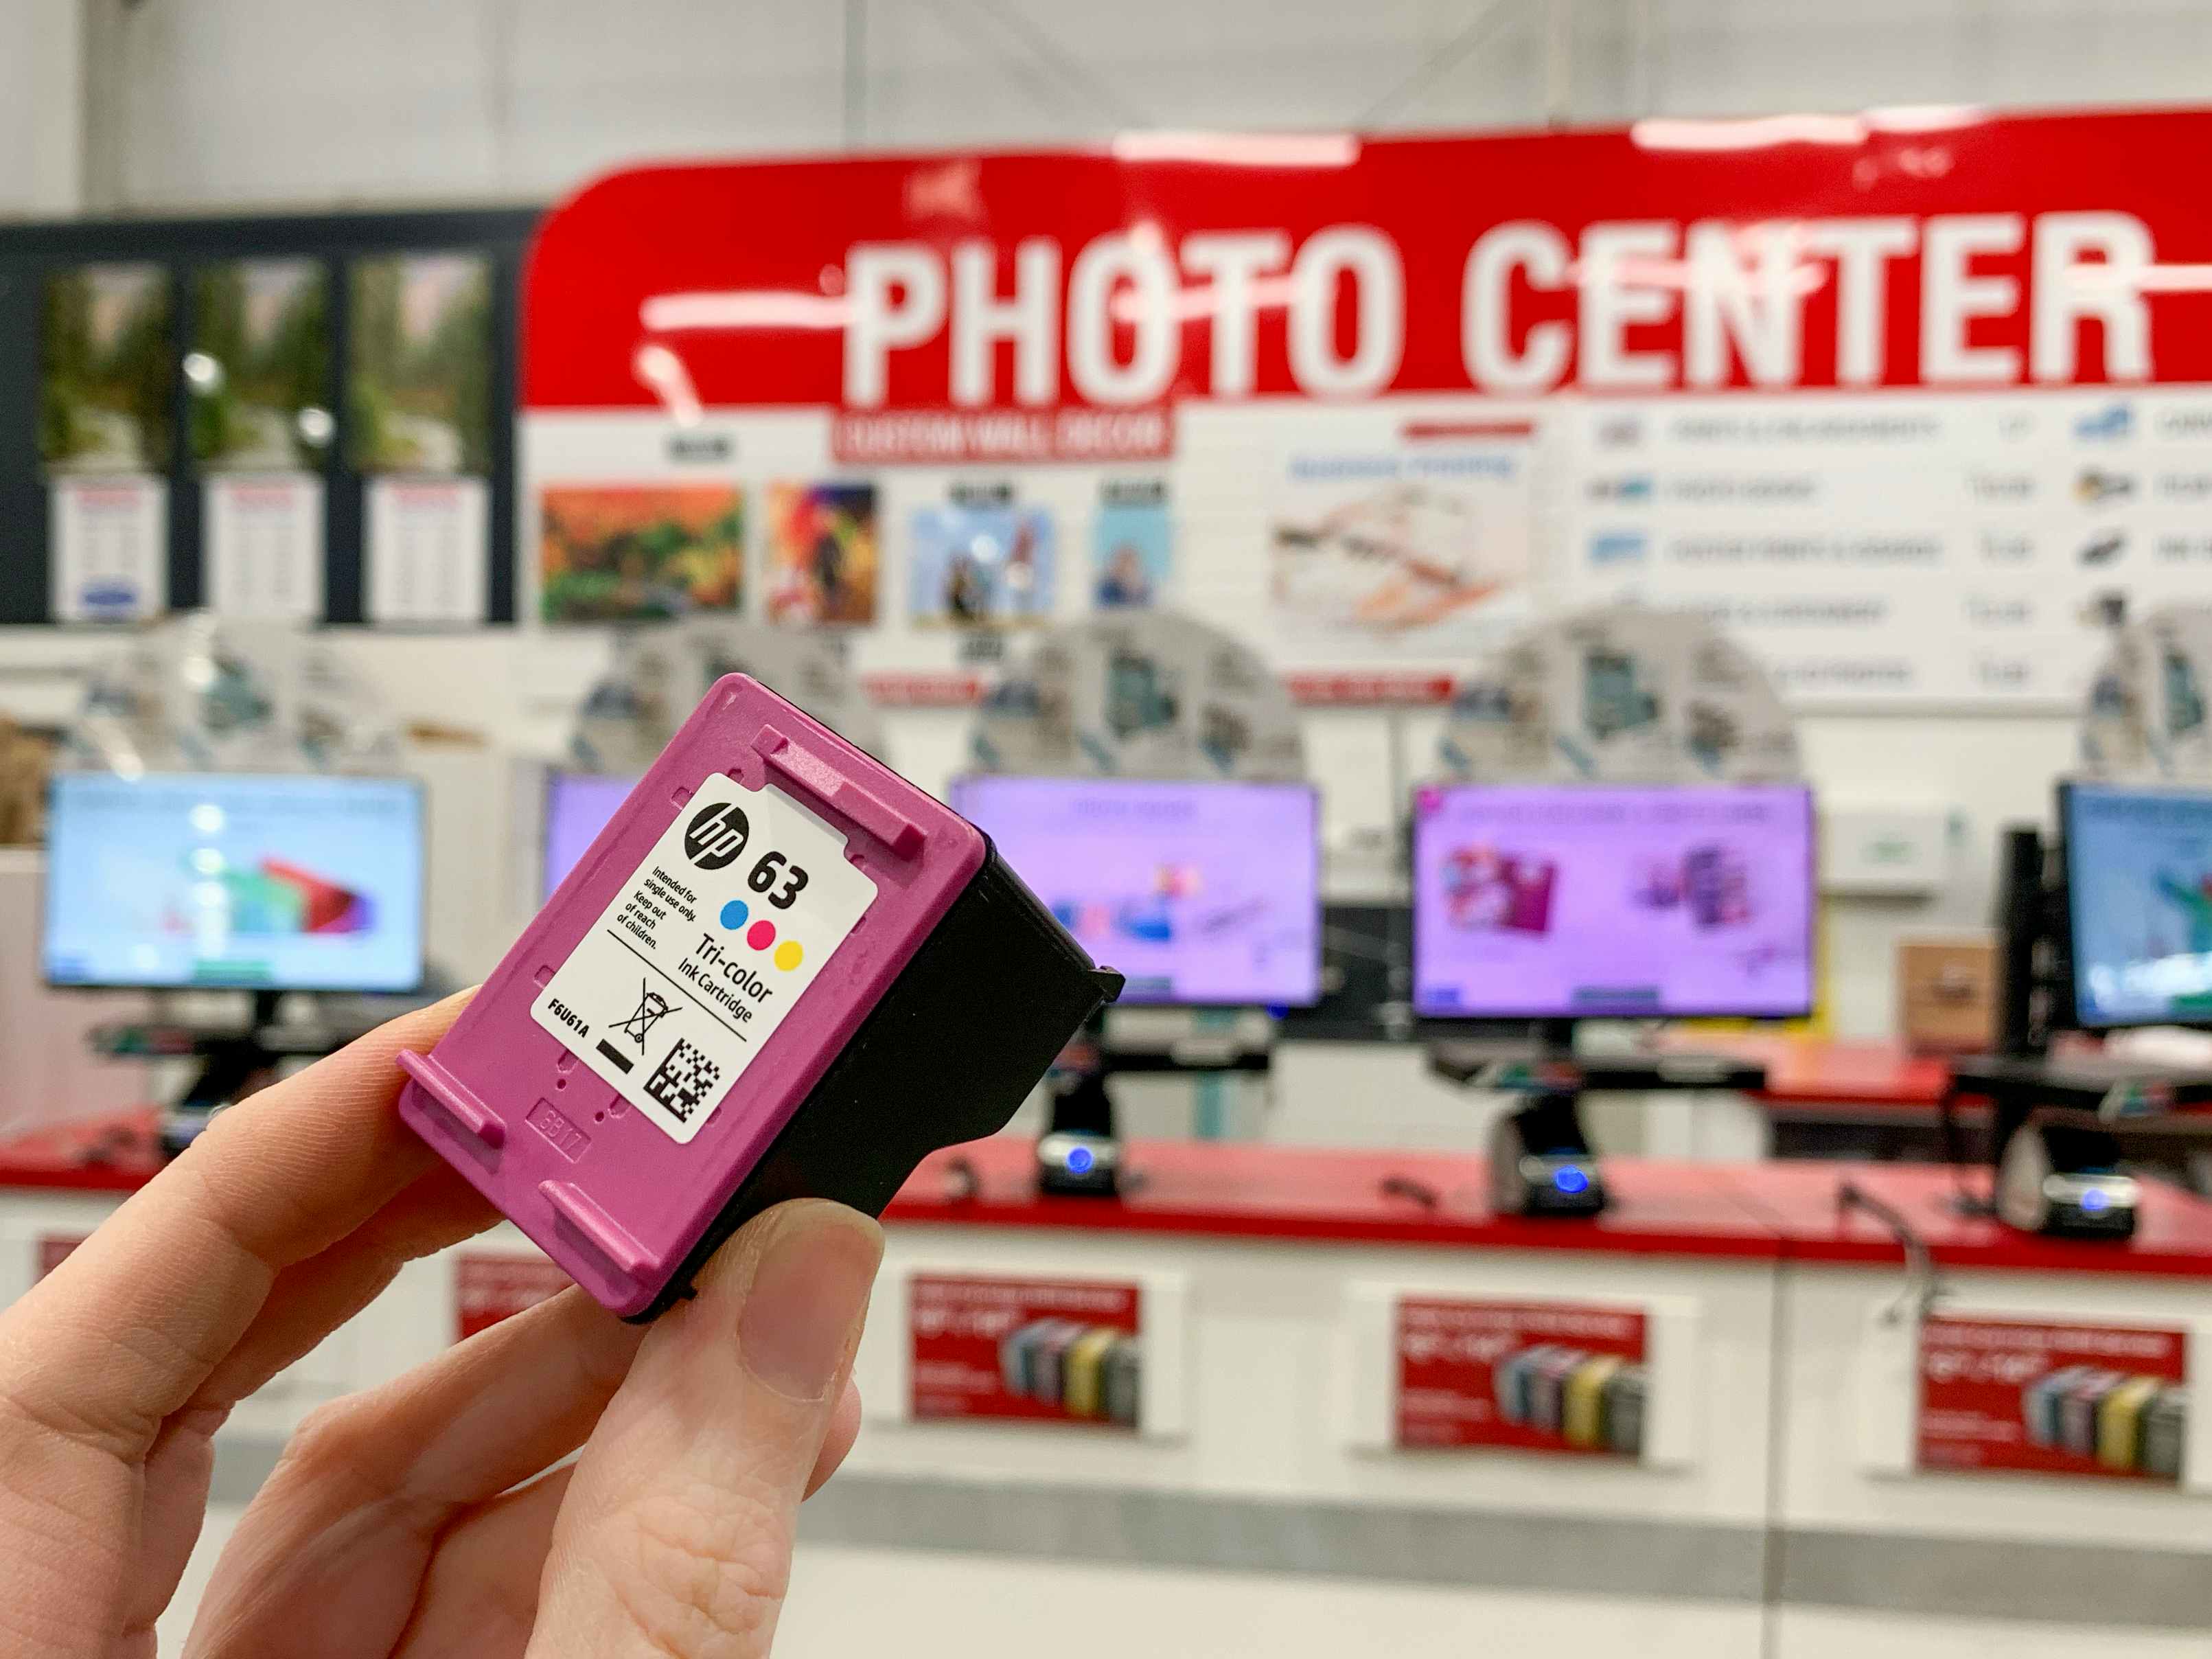 An HP ink cartridge held in front of the Costco photo center.